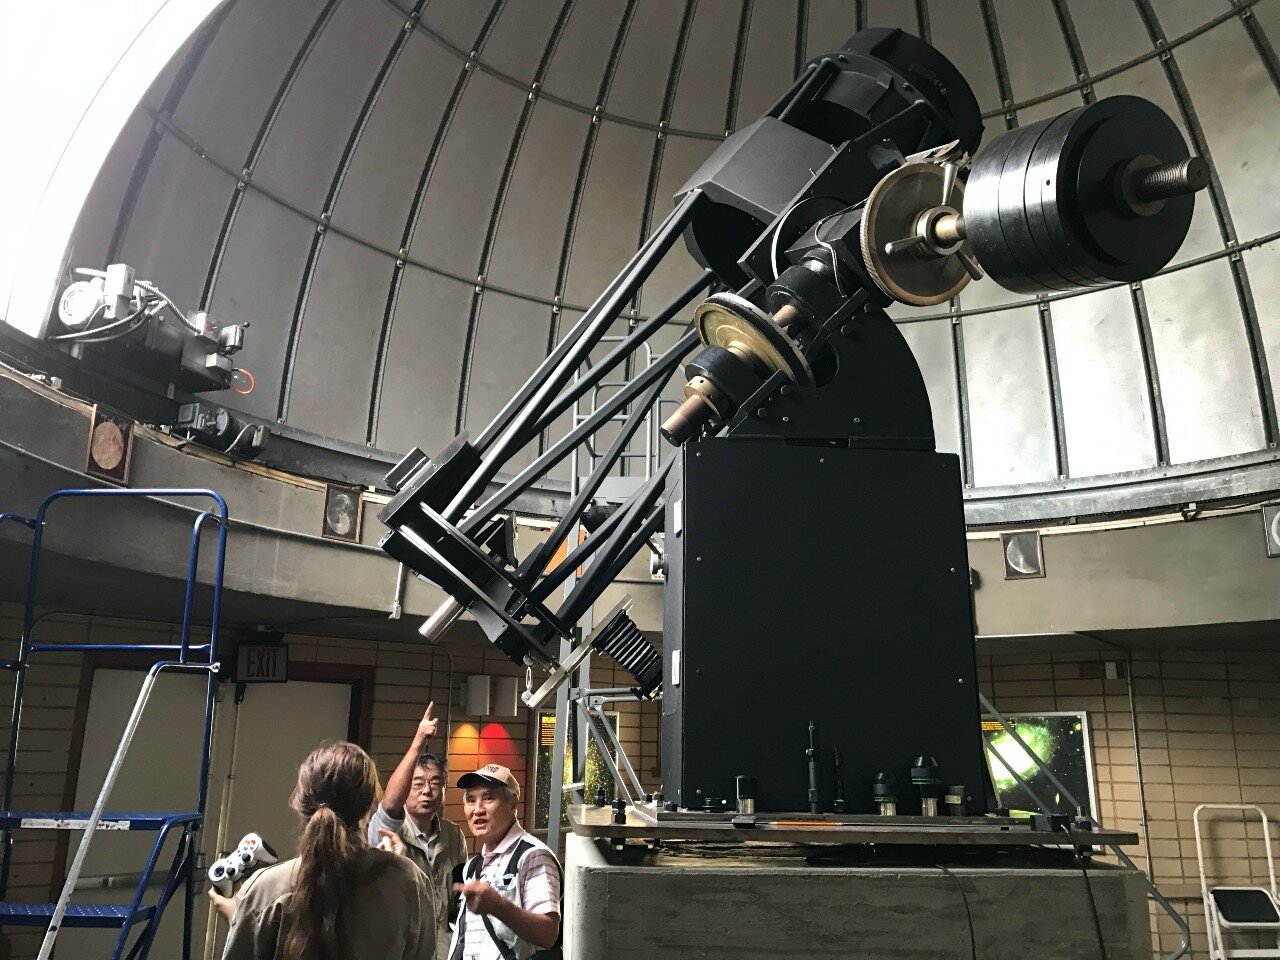  Inside the Observatory. Note International Astronomy Visitors from Japan who traveled to the PNW to experience the 2017 Eclipse (author’s brother and self en route to Eastern OR for the 2017 Total Eclipse of the Sun) by Dee Caputo 